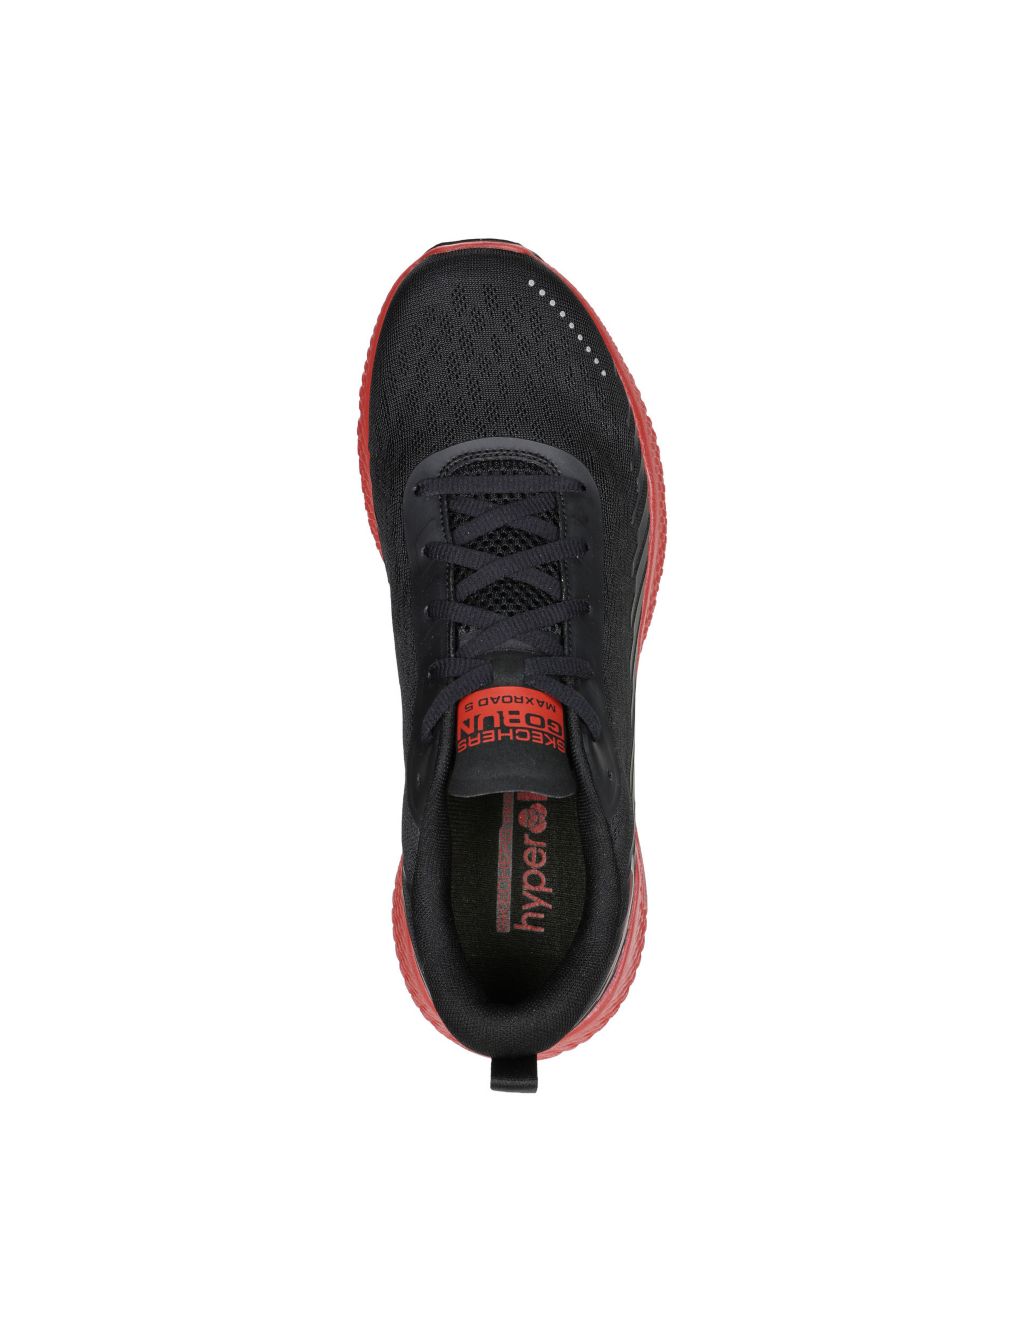 GOrun MaxRoad 5 Lace Up Trainers image 3